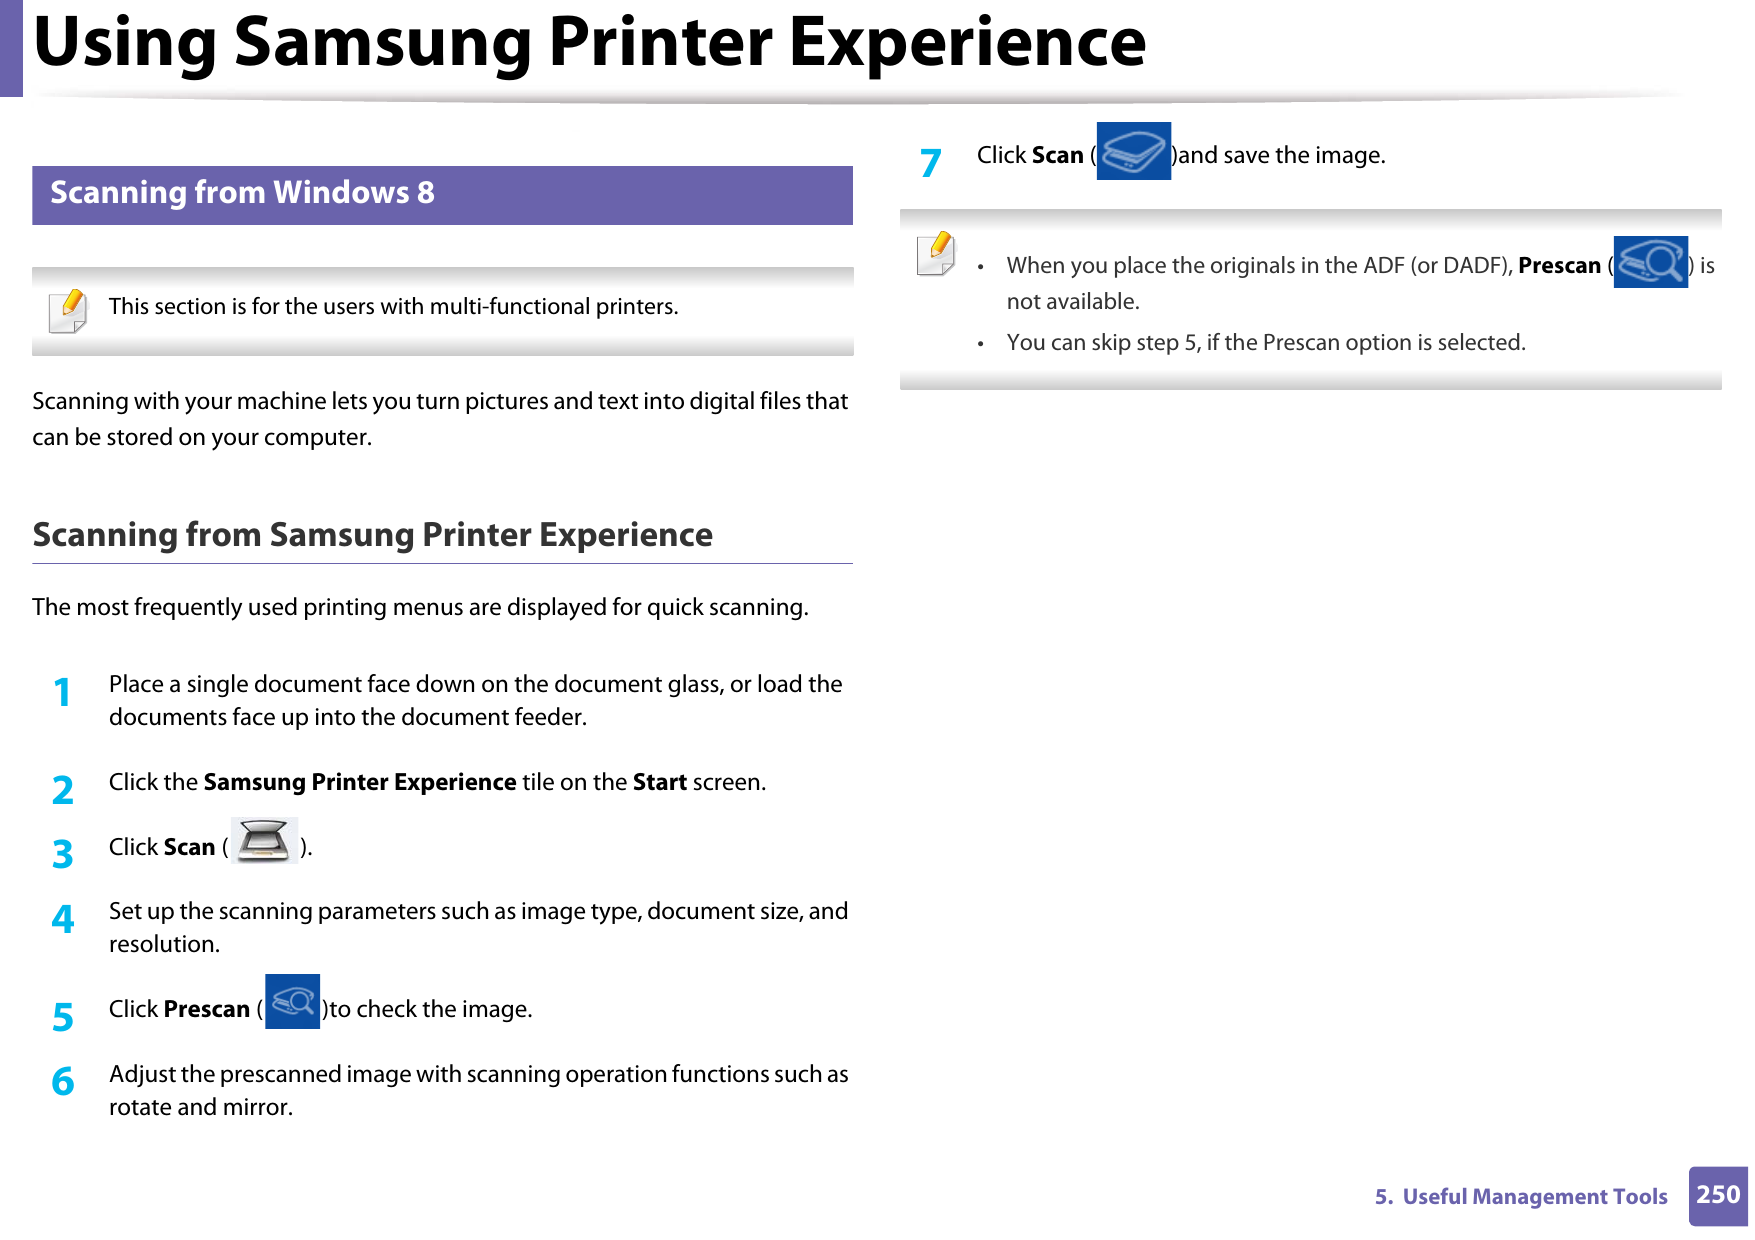 Using Samsung Printer Experience2505.  Useful Management Tools11 Scanning from Windows 8 This section is for the users with multi-functional printers. Scanning with your machine lets you turn pictures and text into digital files that can be stored on your computer.Scanning from Samsung Printer ExperienceThe most frequently used printing menus are displayed for quick scanning.1Place a single document face down on the document glass, or load the documents face up into the document feeder.2  Click the Samsung Printer Experience tile on the Start screen.3  Click Scan ().4  Set up the scanning parameters such as image type, document size, and resolution.5  Click Prescan ( )to check the image.6  Adjust the prescanned image with scanning operation functions such as rotate and mirror.7  Click Scan ( )and save the image.  • When you place the originals in the ADF (or DADF), Prescan ( ) is not available.• You can skip step 5, if the Prescan option is selected.  